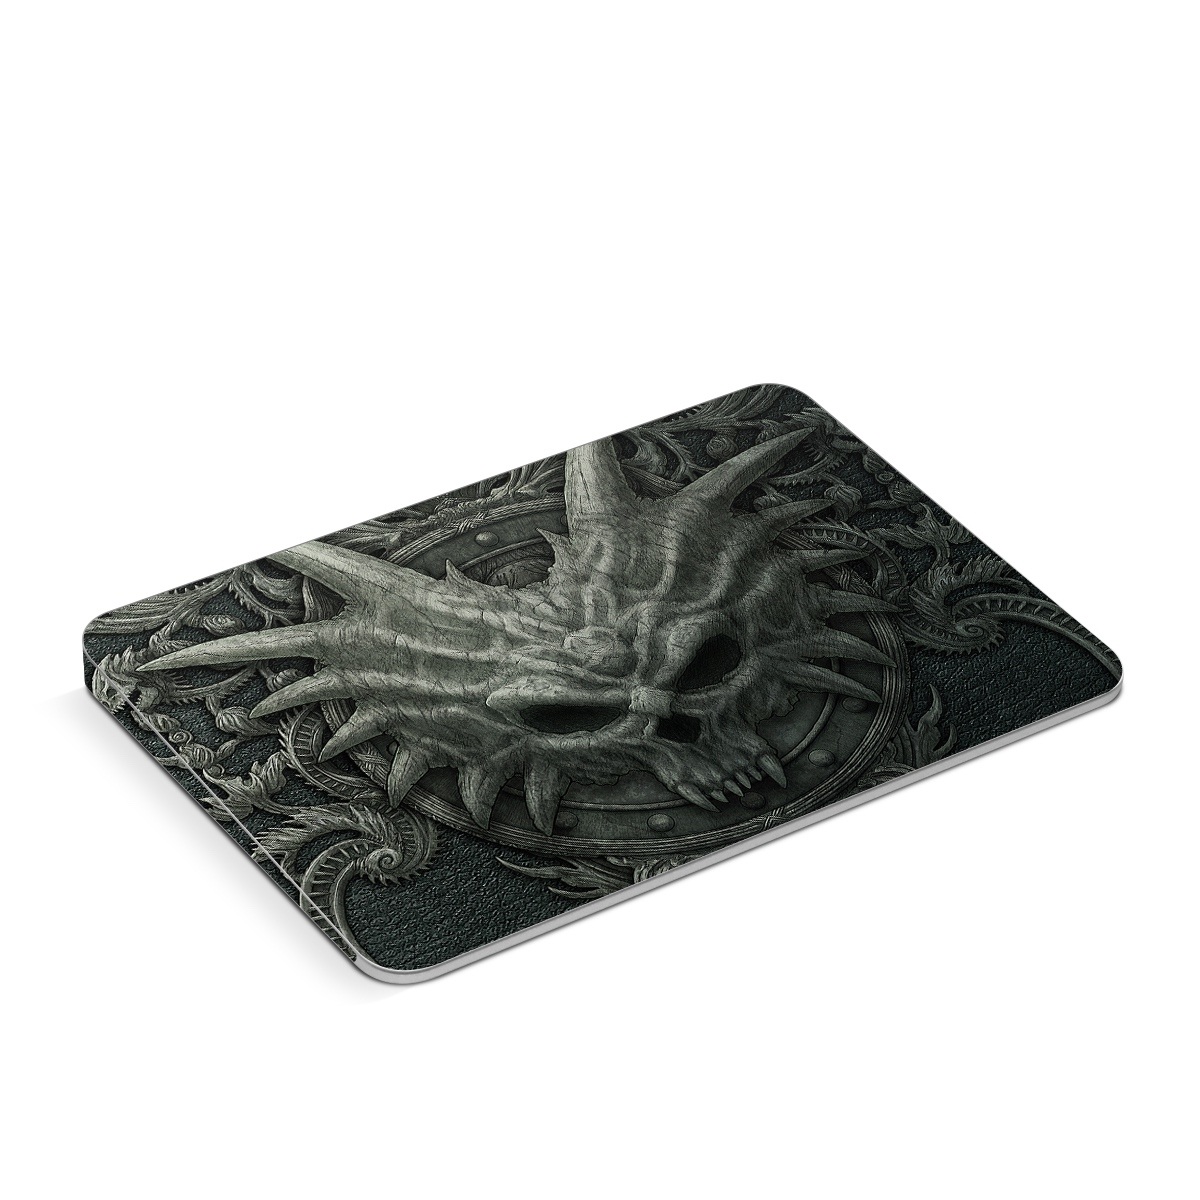 Apple Magic Trackpad Skin design of Demon, Dragon, Fictional character, Illustration, Supernatural creature, Drawing, Symmetry, Art, Mythology, Mythical creature, with black, gray colors